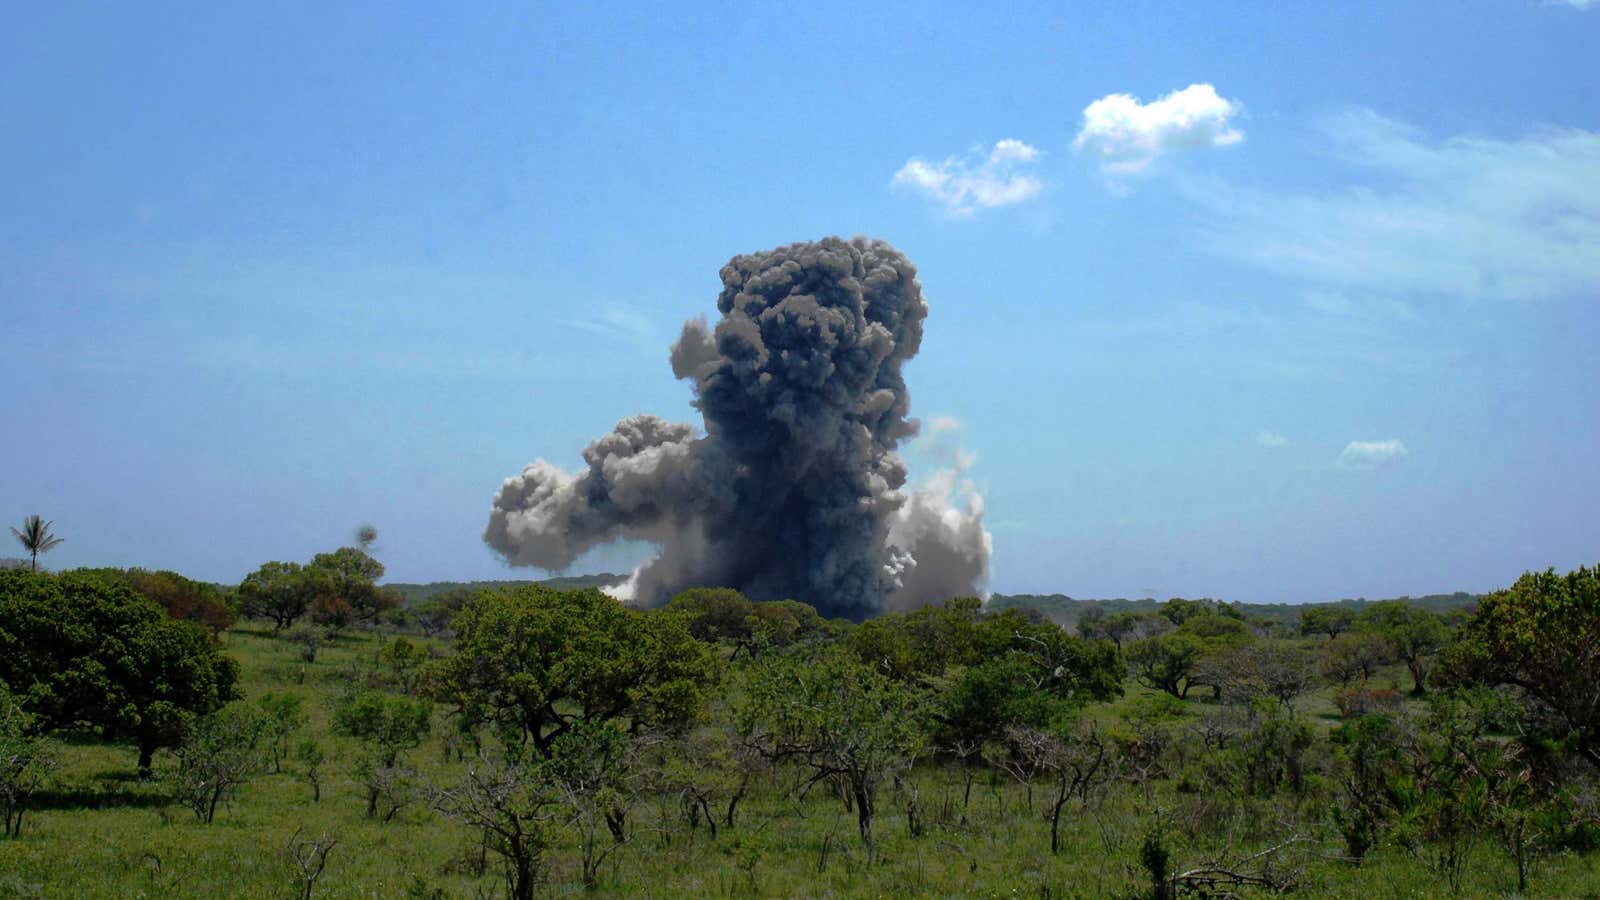 Smoke rises from the detonation of weapons and landmines left over from Mozambique’s civil war near Bilene in southern Mozambique in 2005.